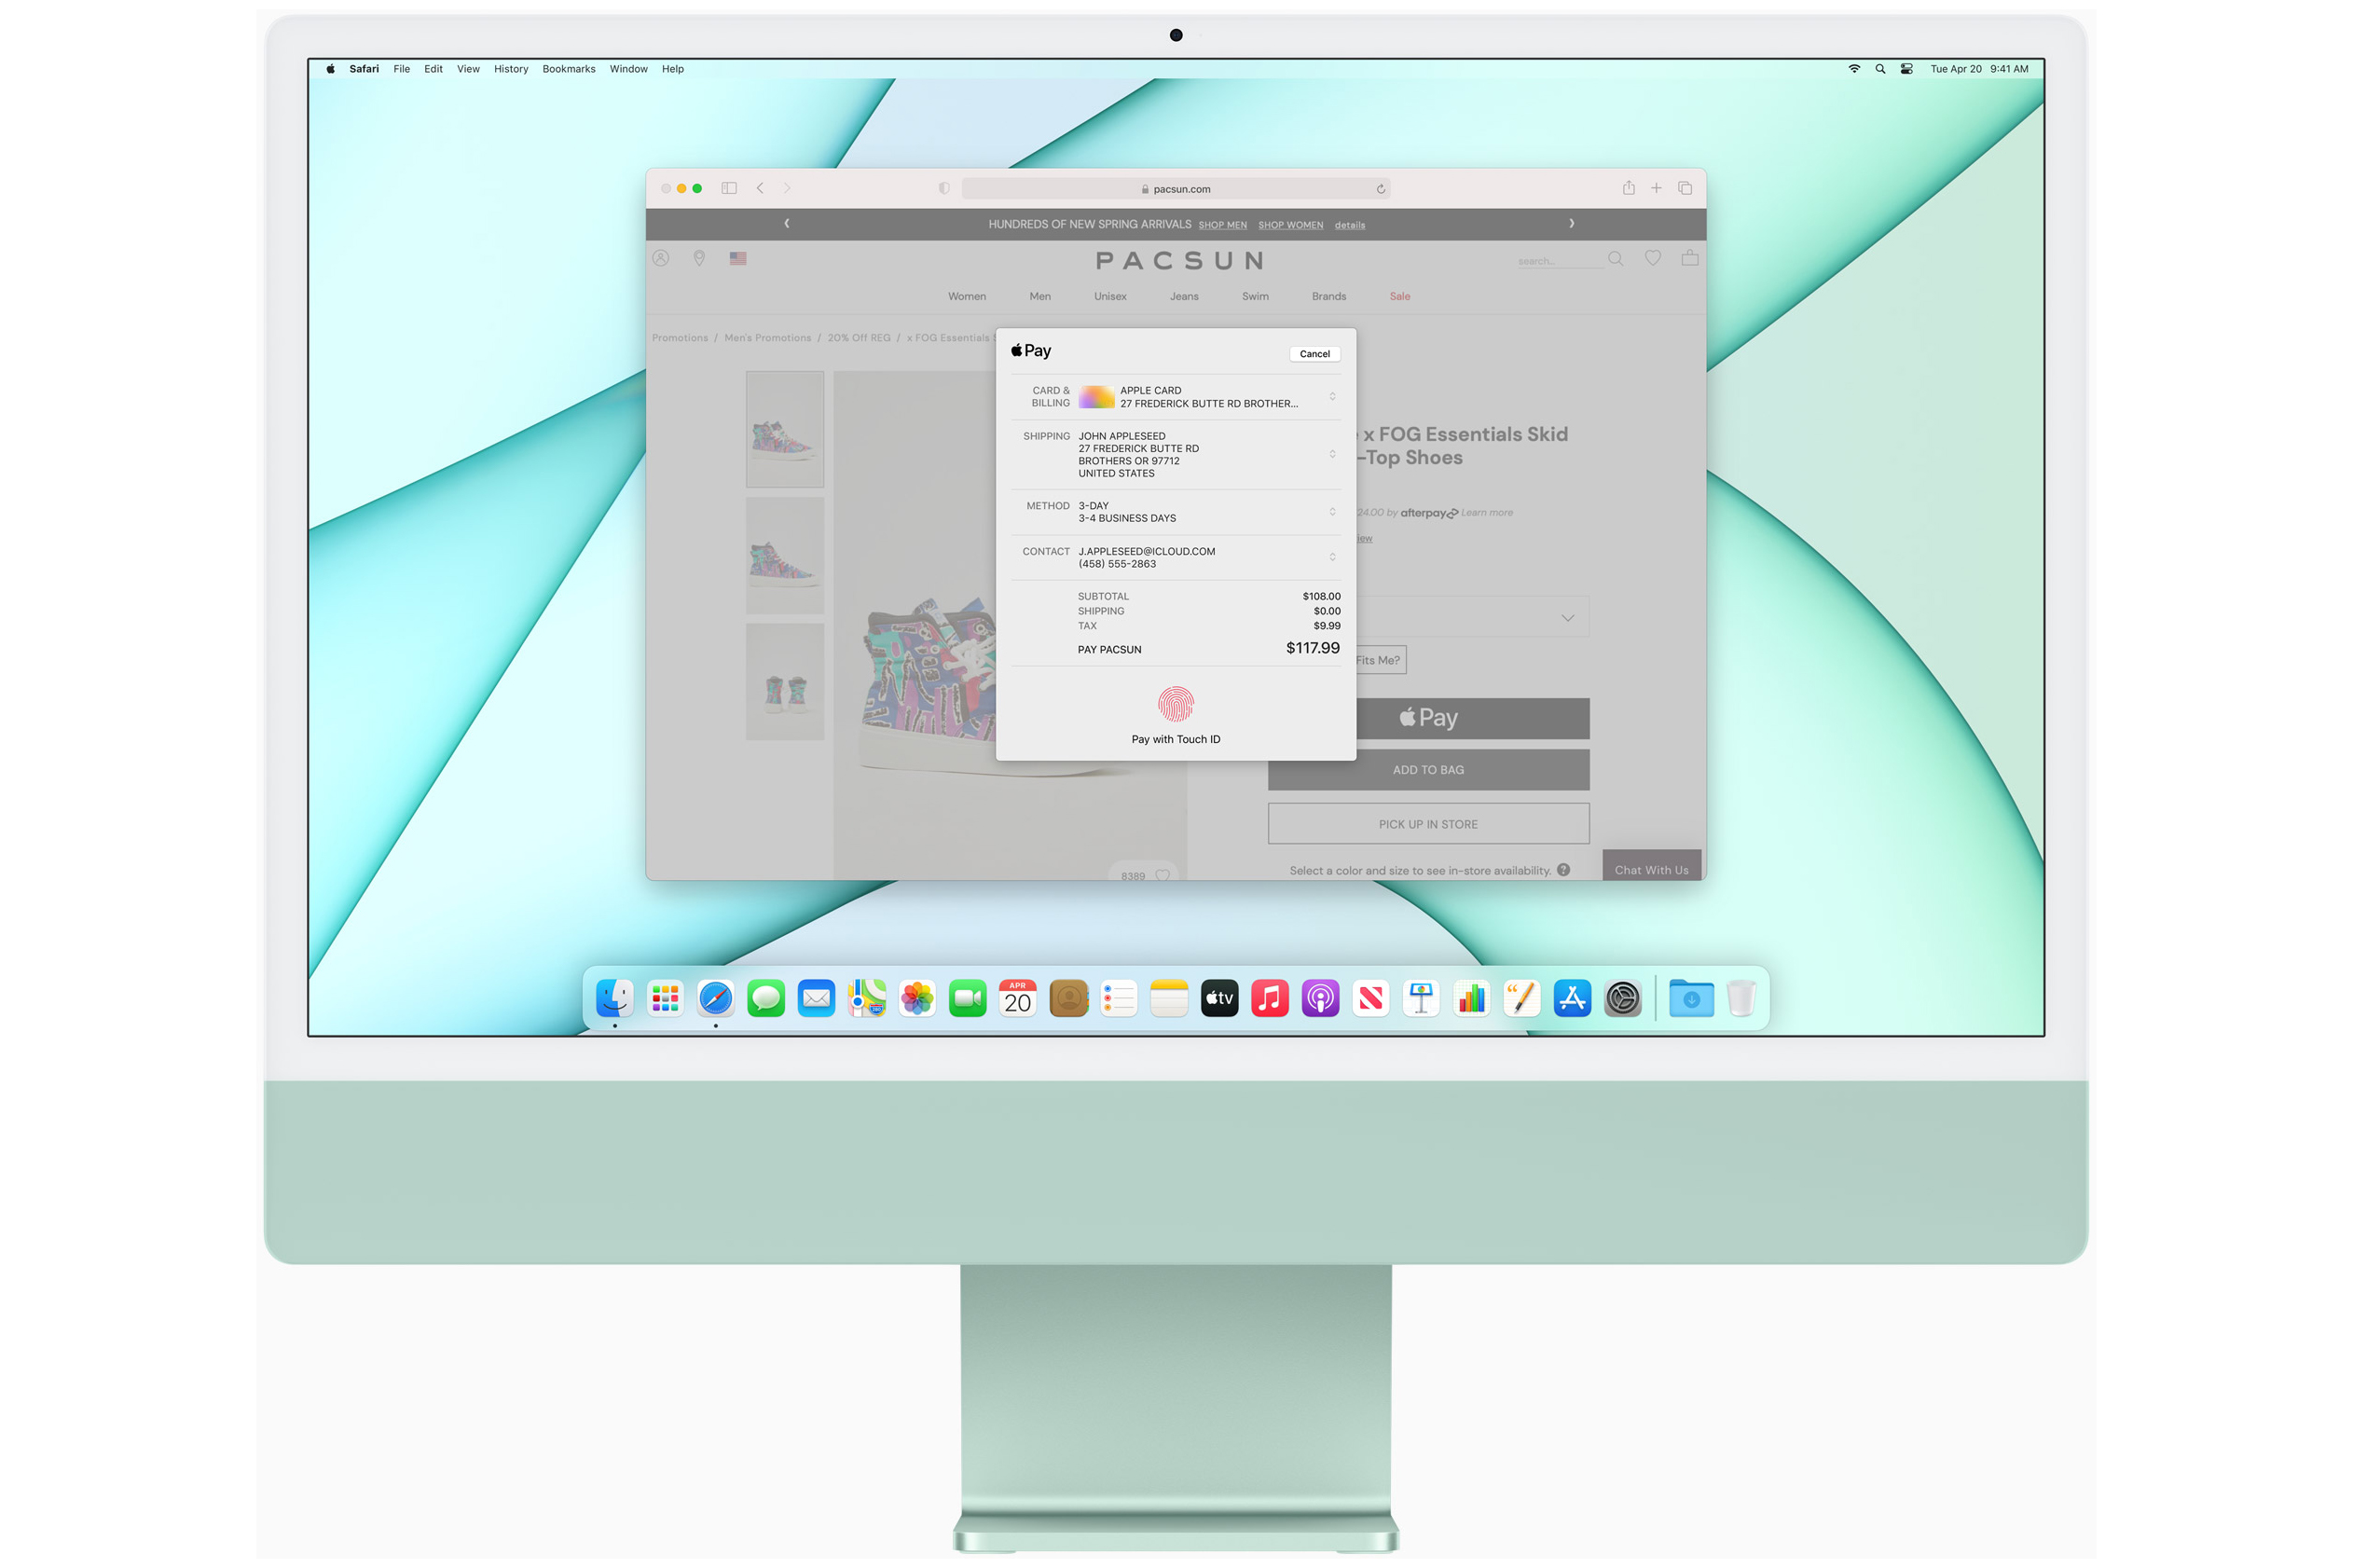 A picture of the new iMac.